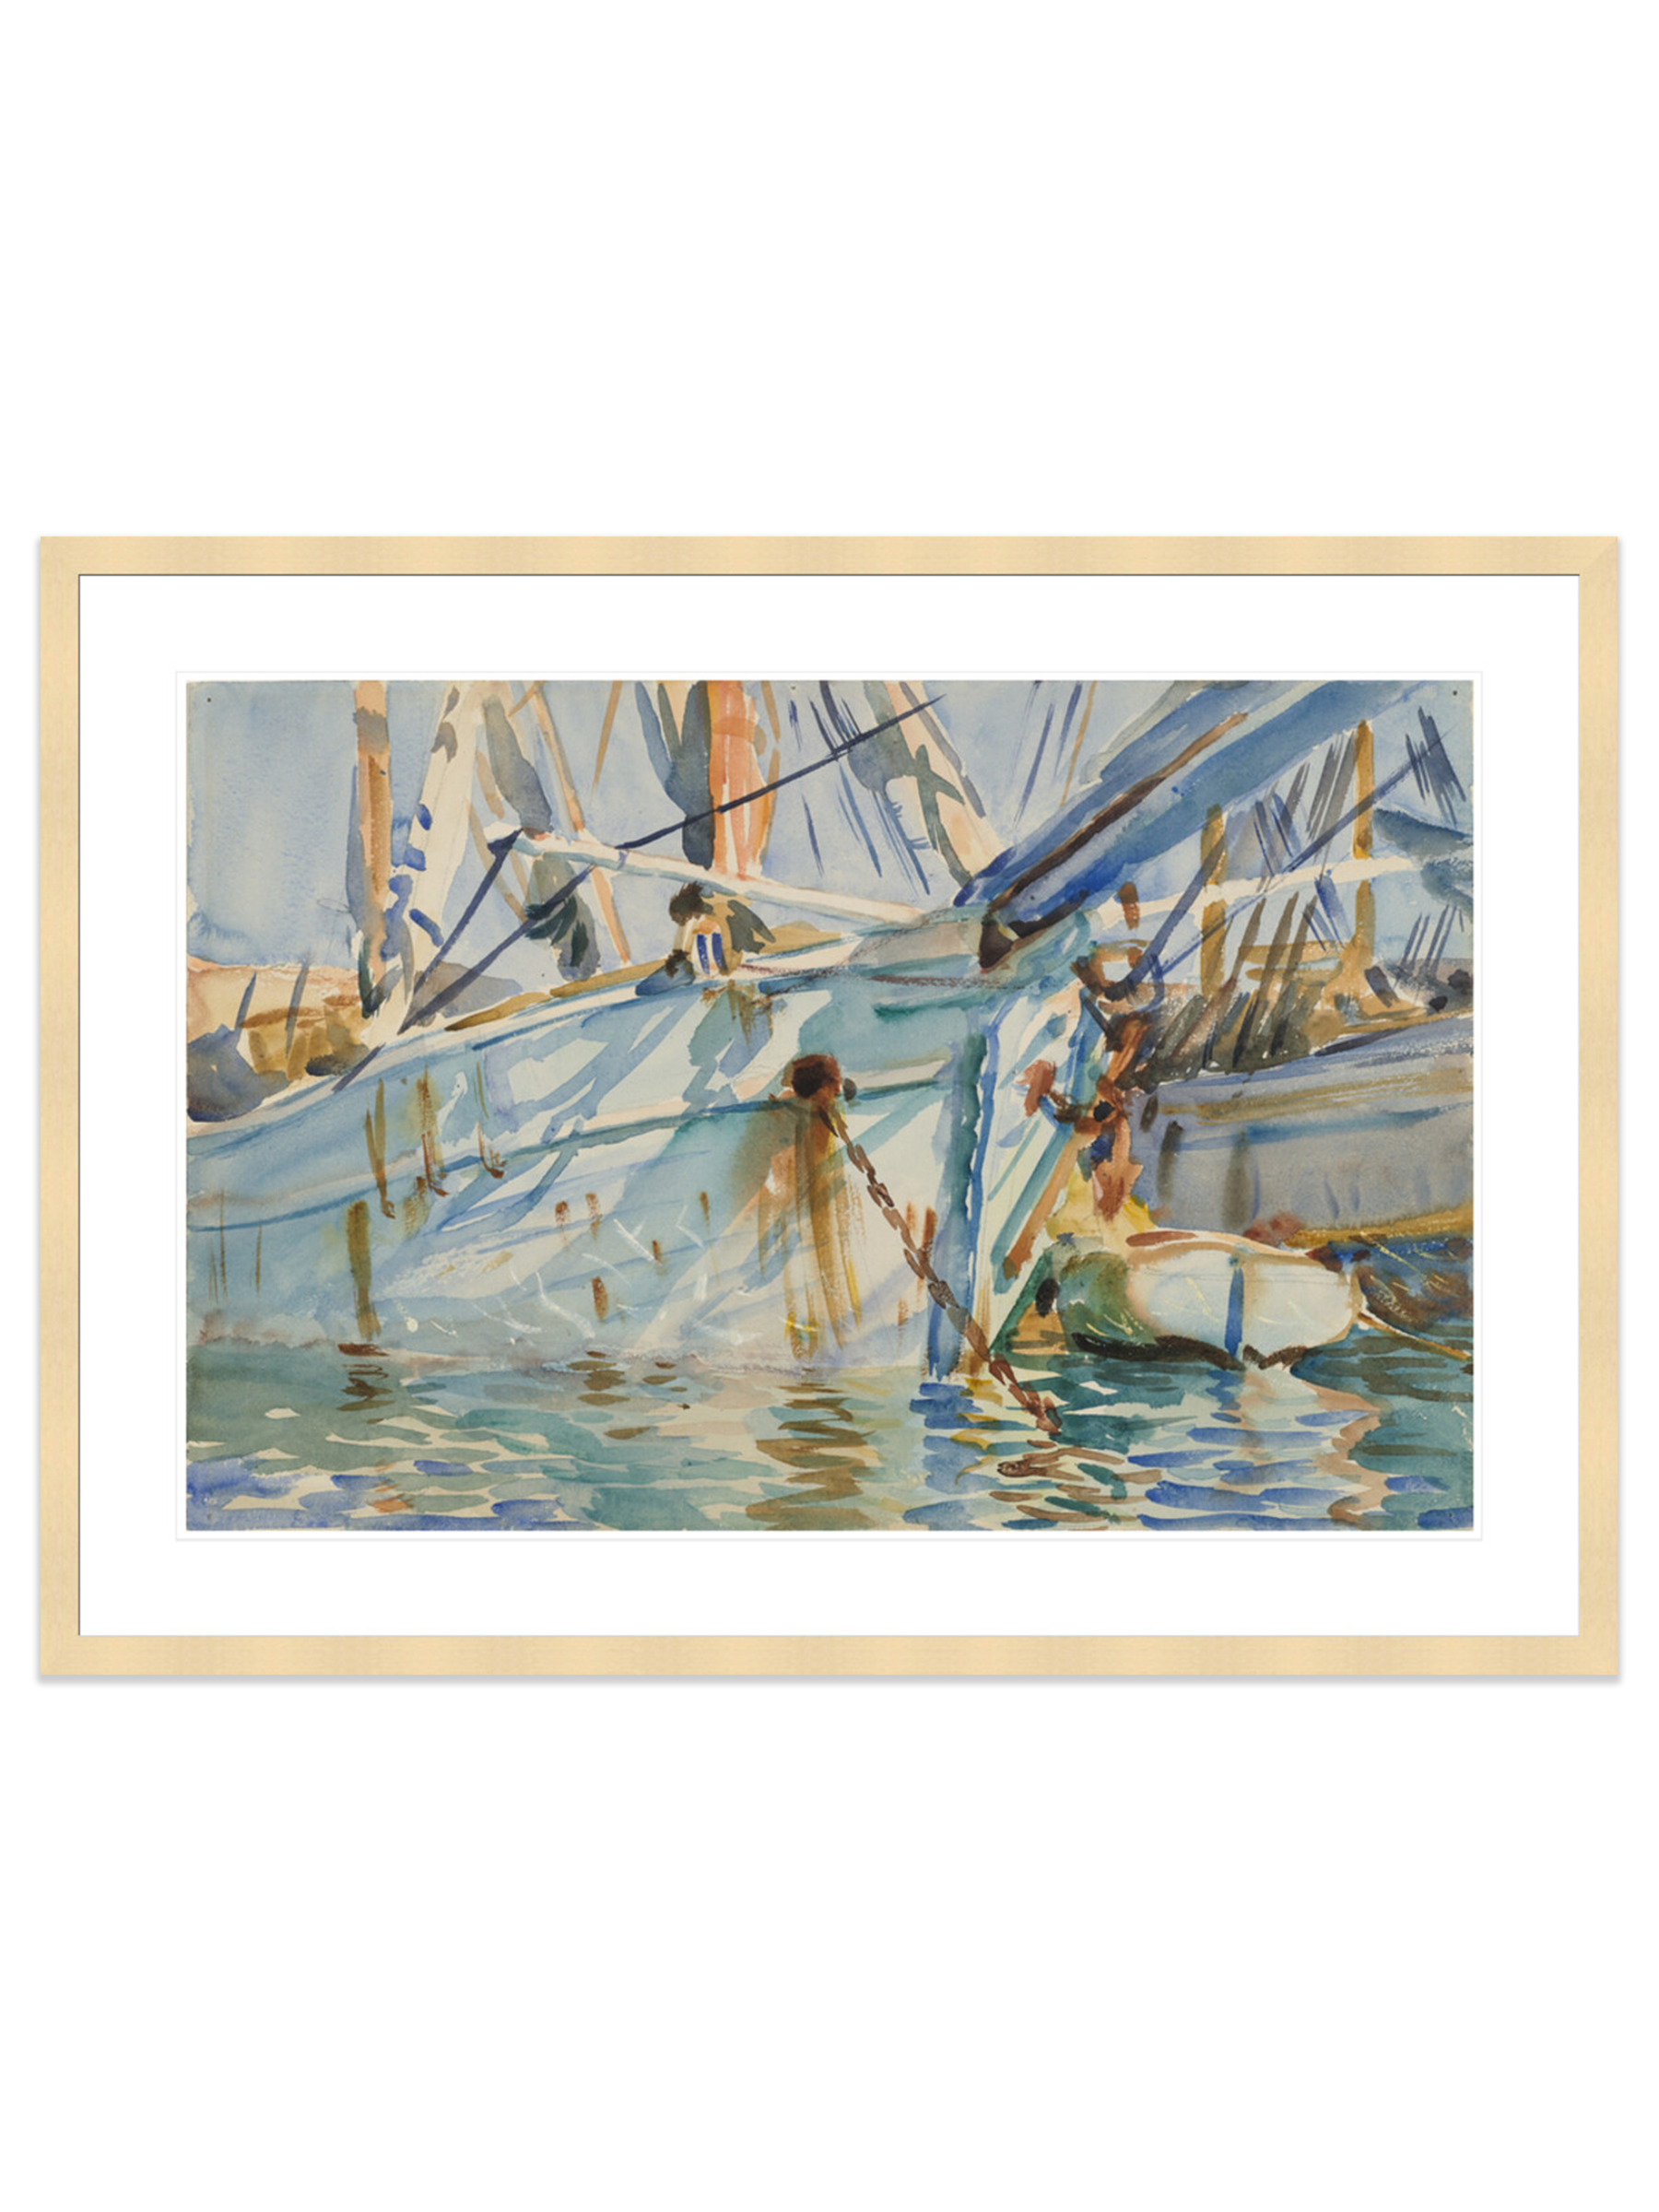 In a Levantine Port (Print) by John Singer Sargent